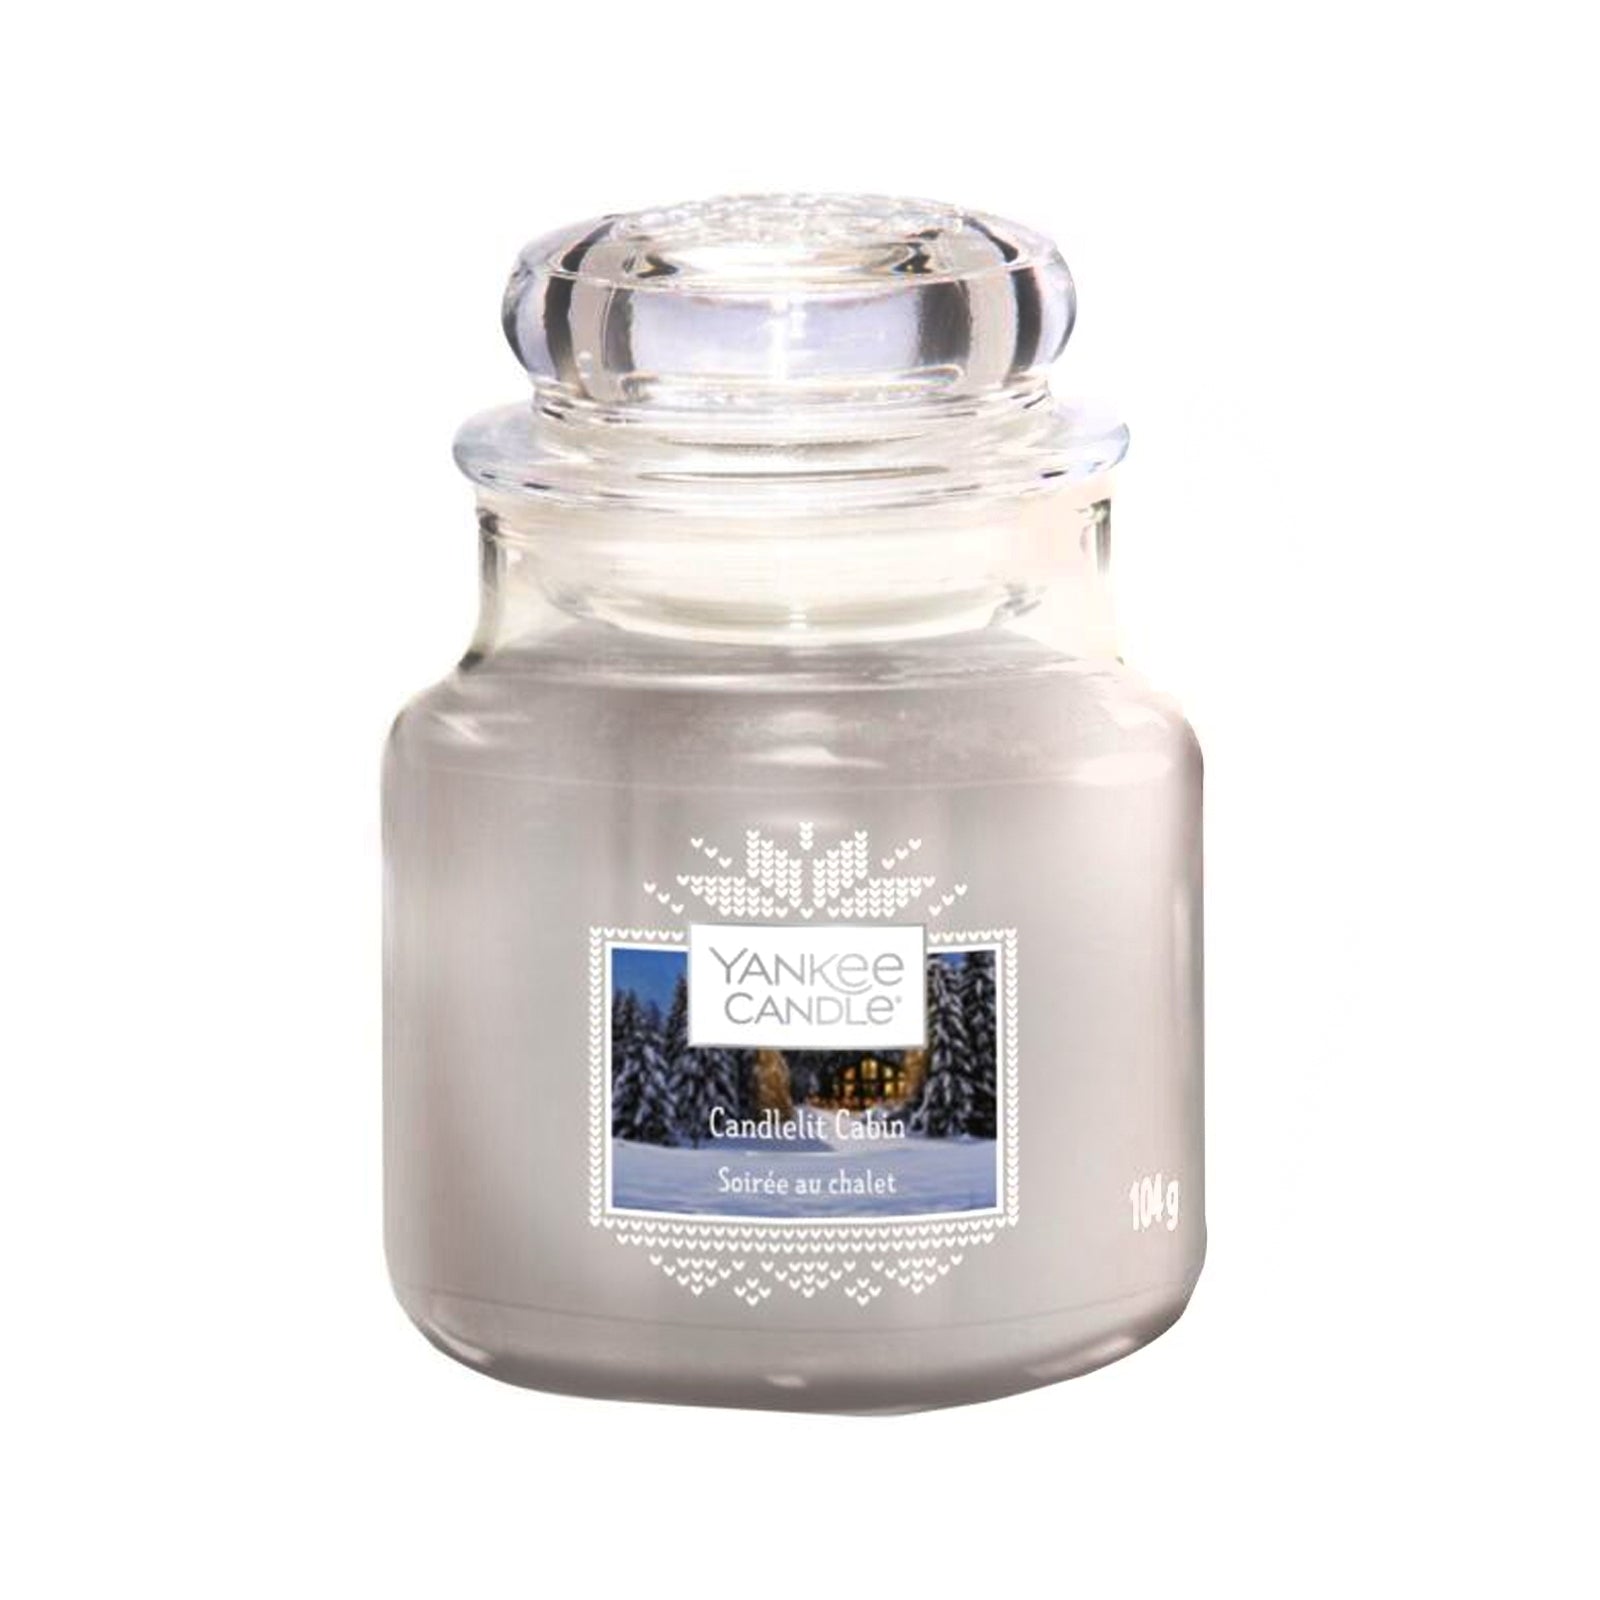 Yankee Candle Candlelit Cabin Small – Yorkshire Trading Company